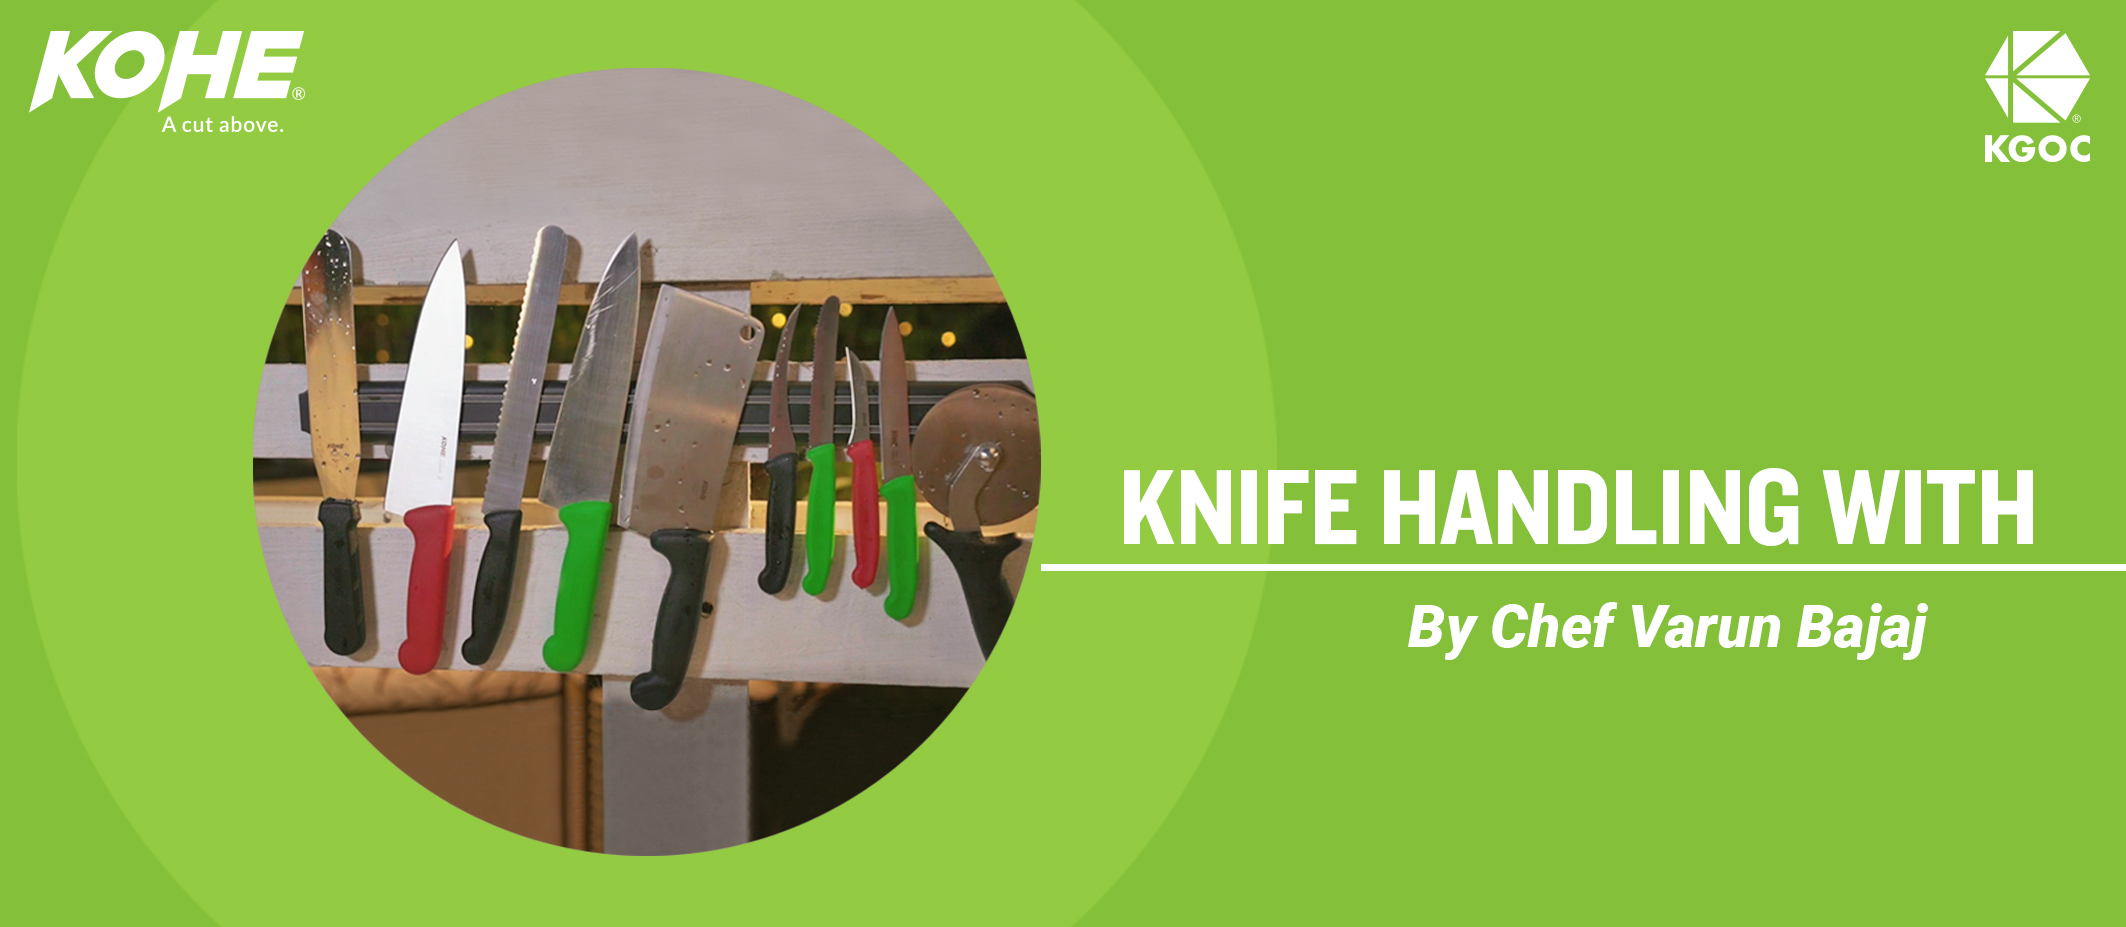 Learn to handle knives from expert